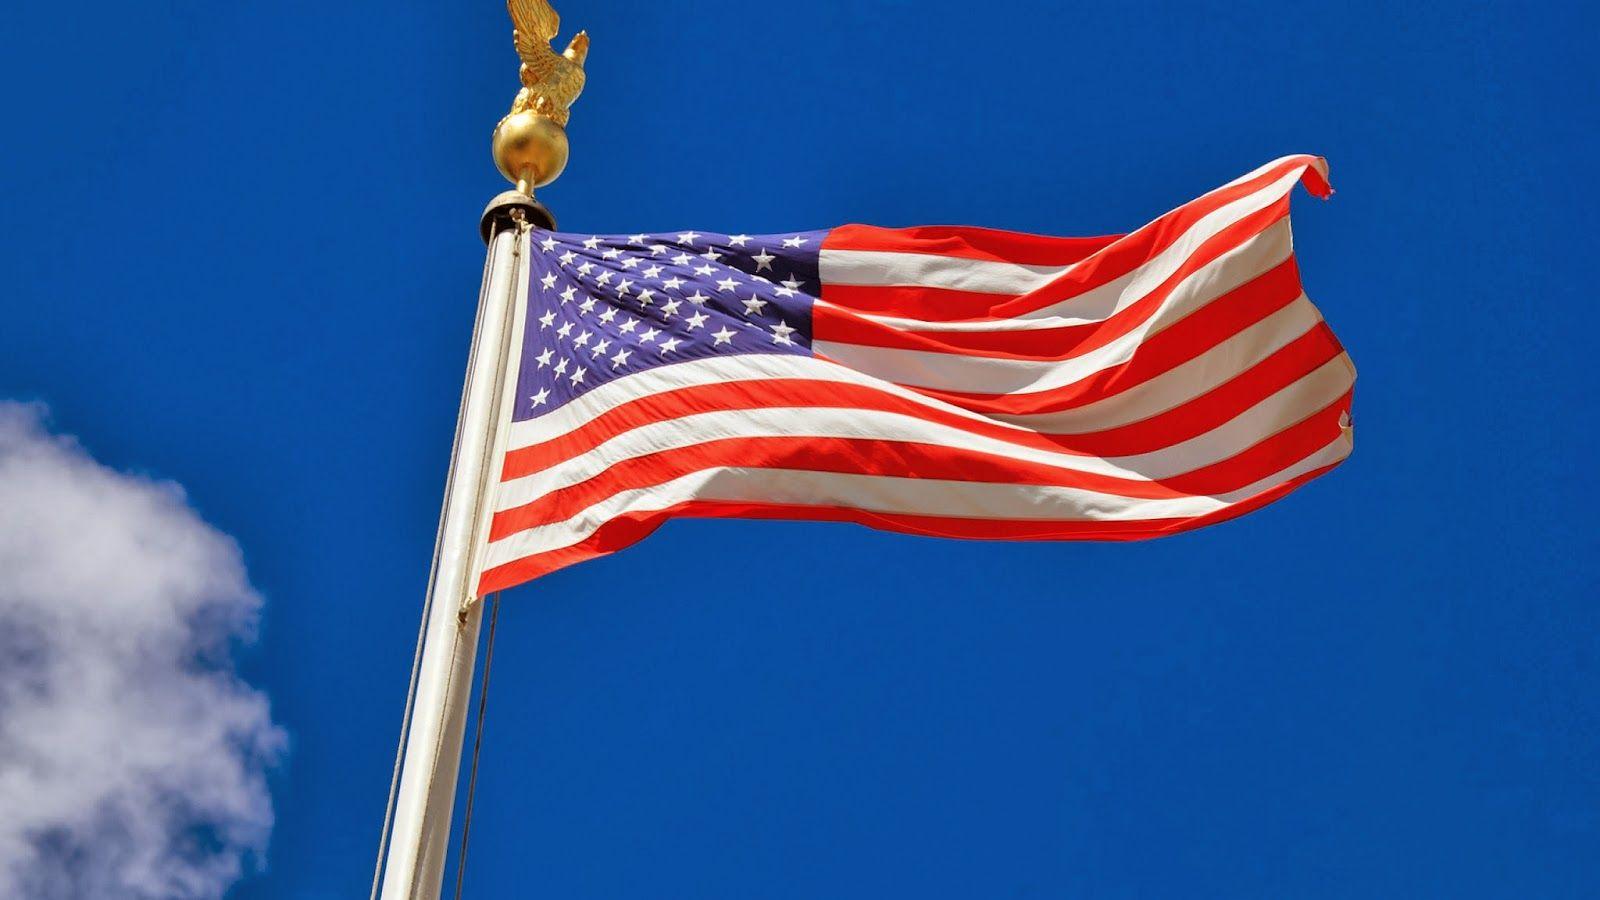 The American Flag Wallpaper. Country Flag Wallpaper